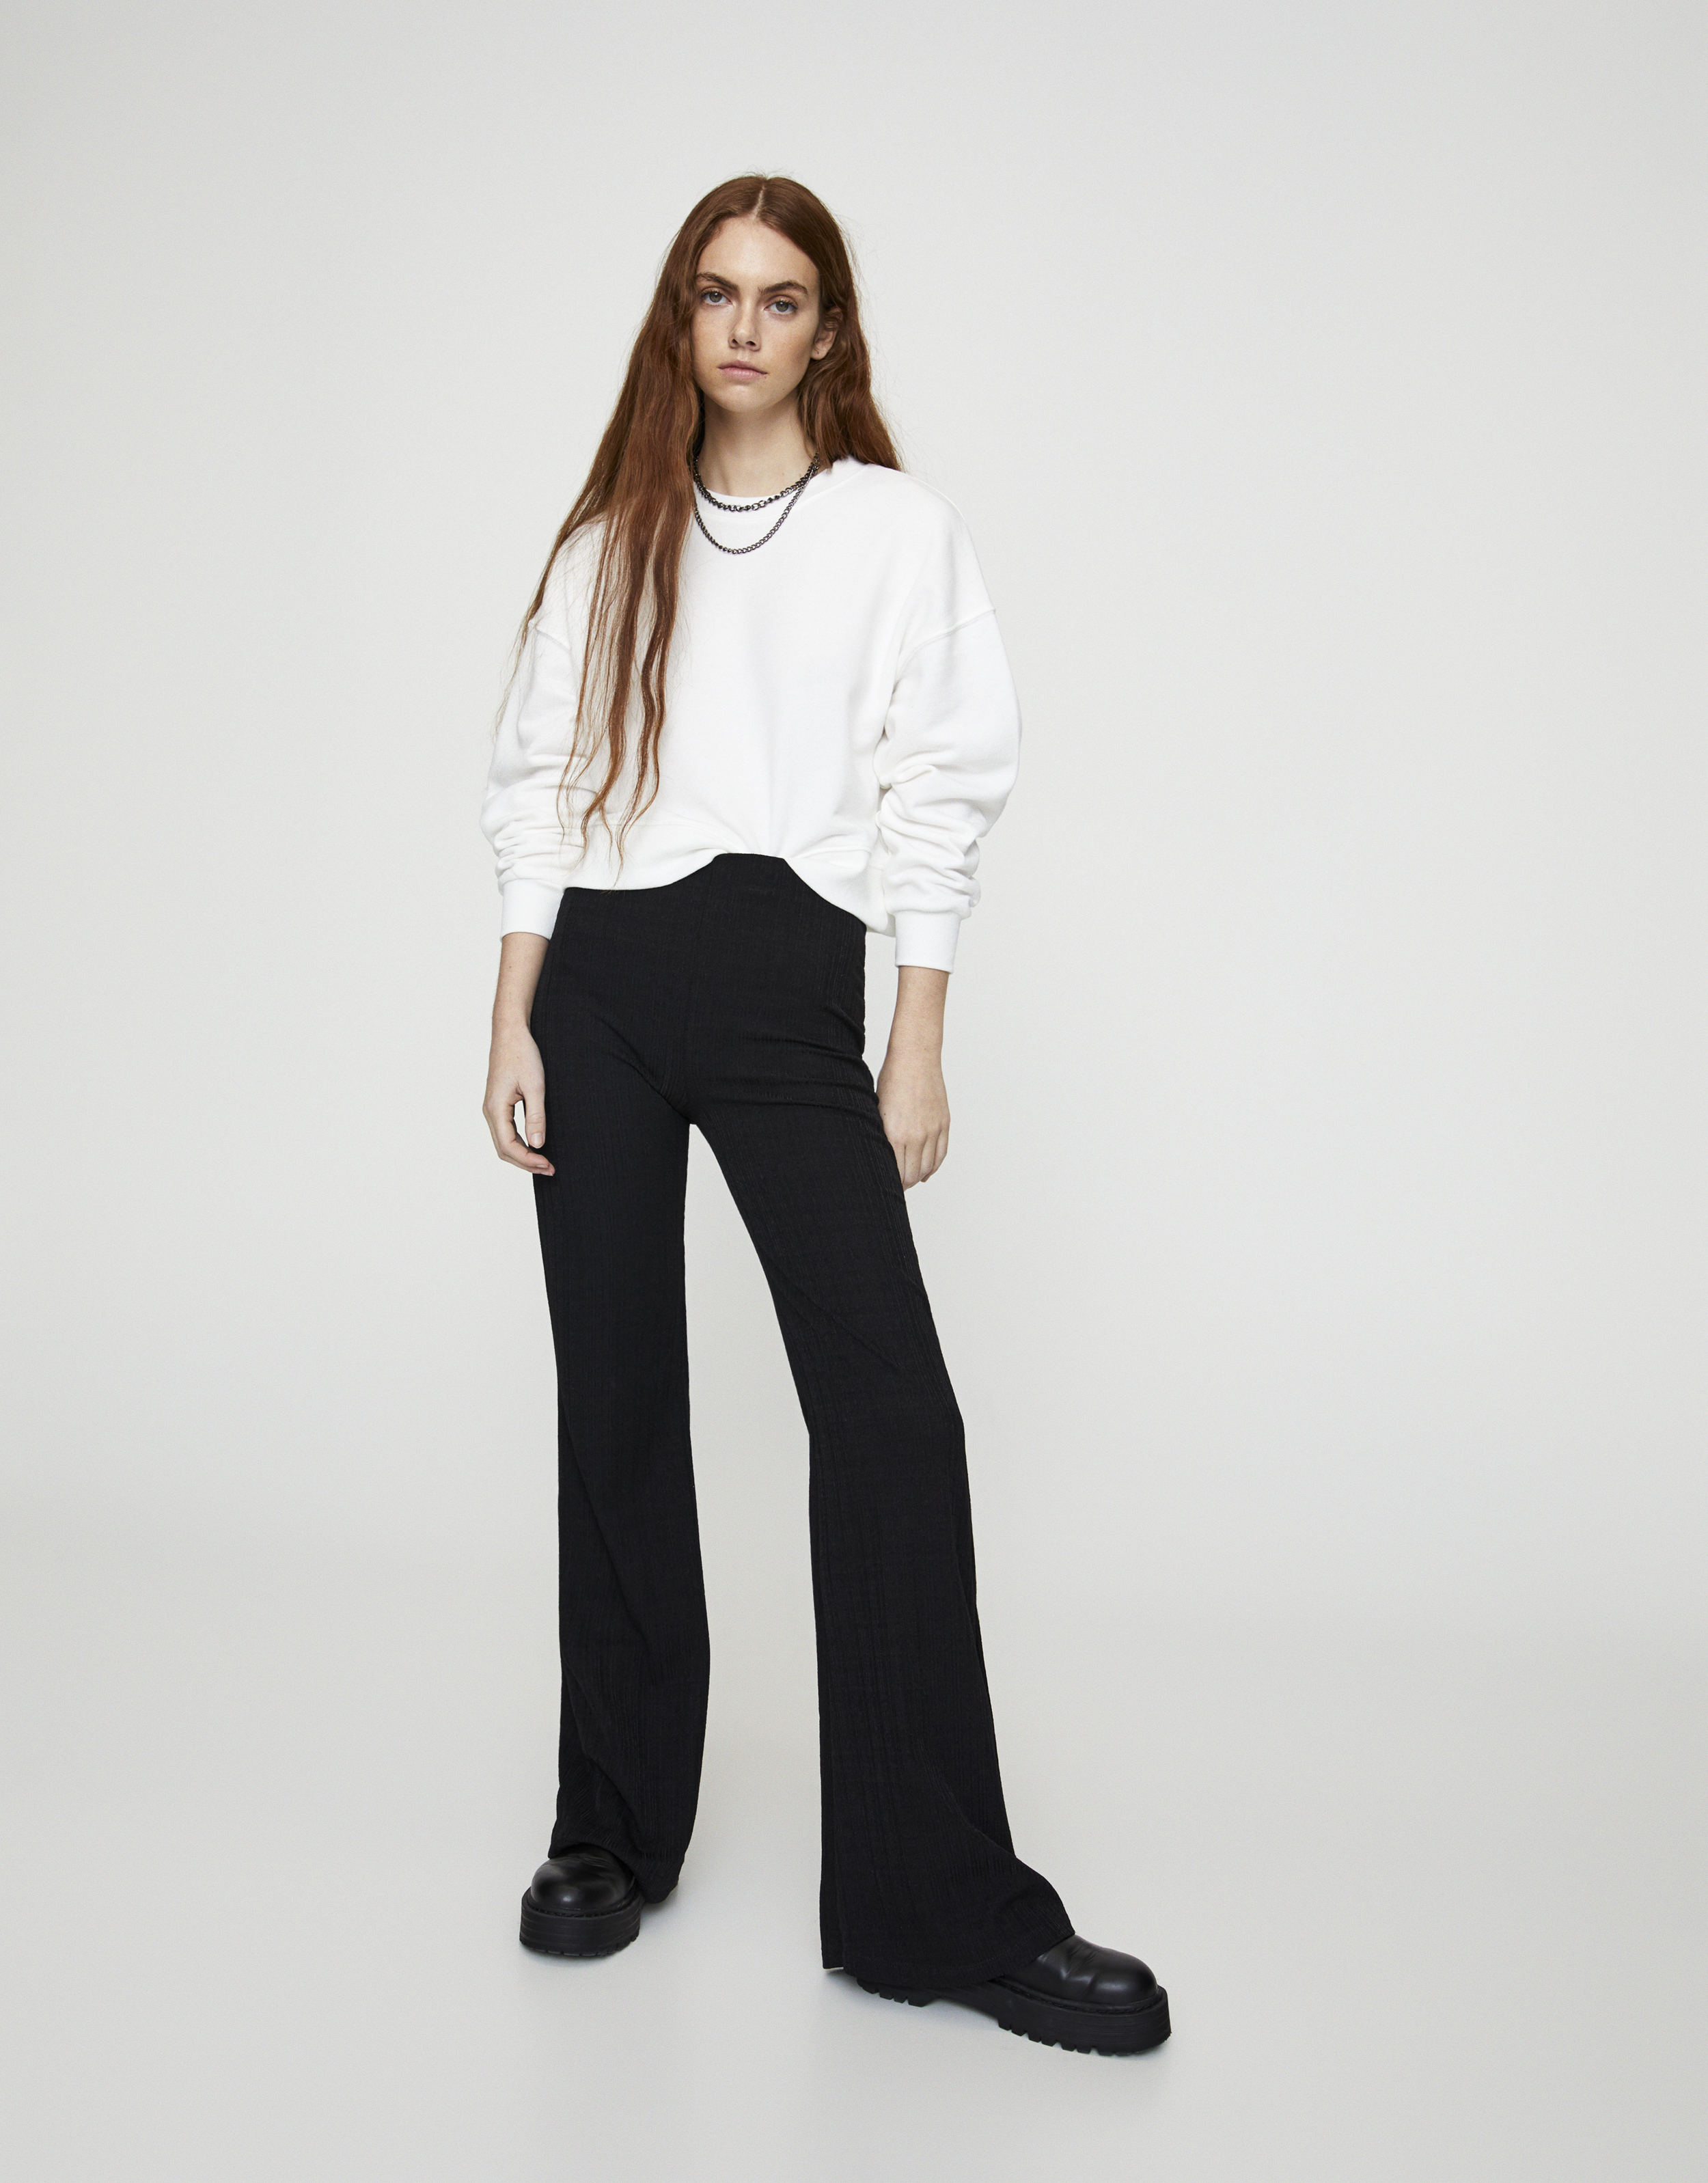 baggy ankle pants